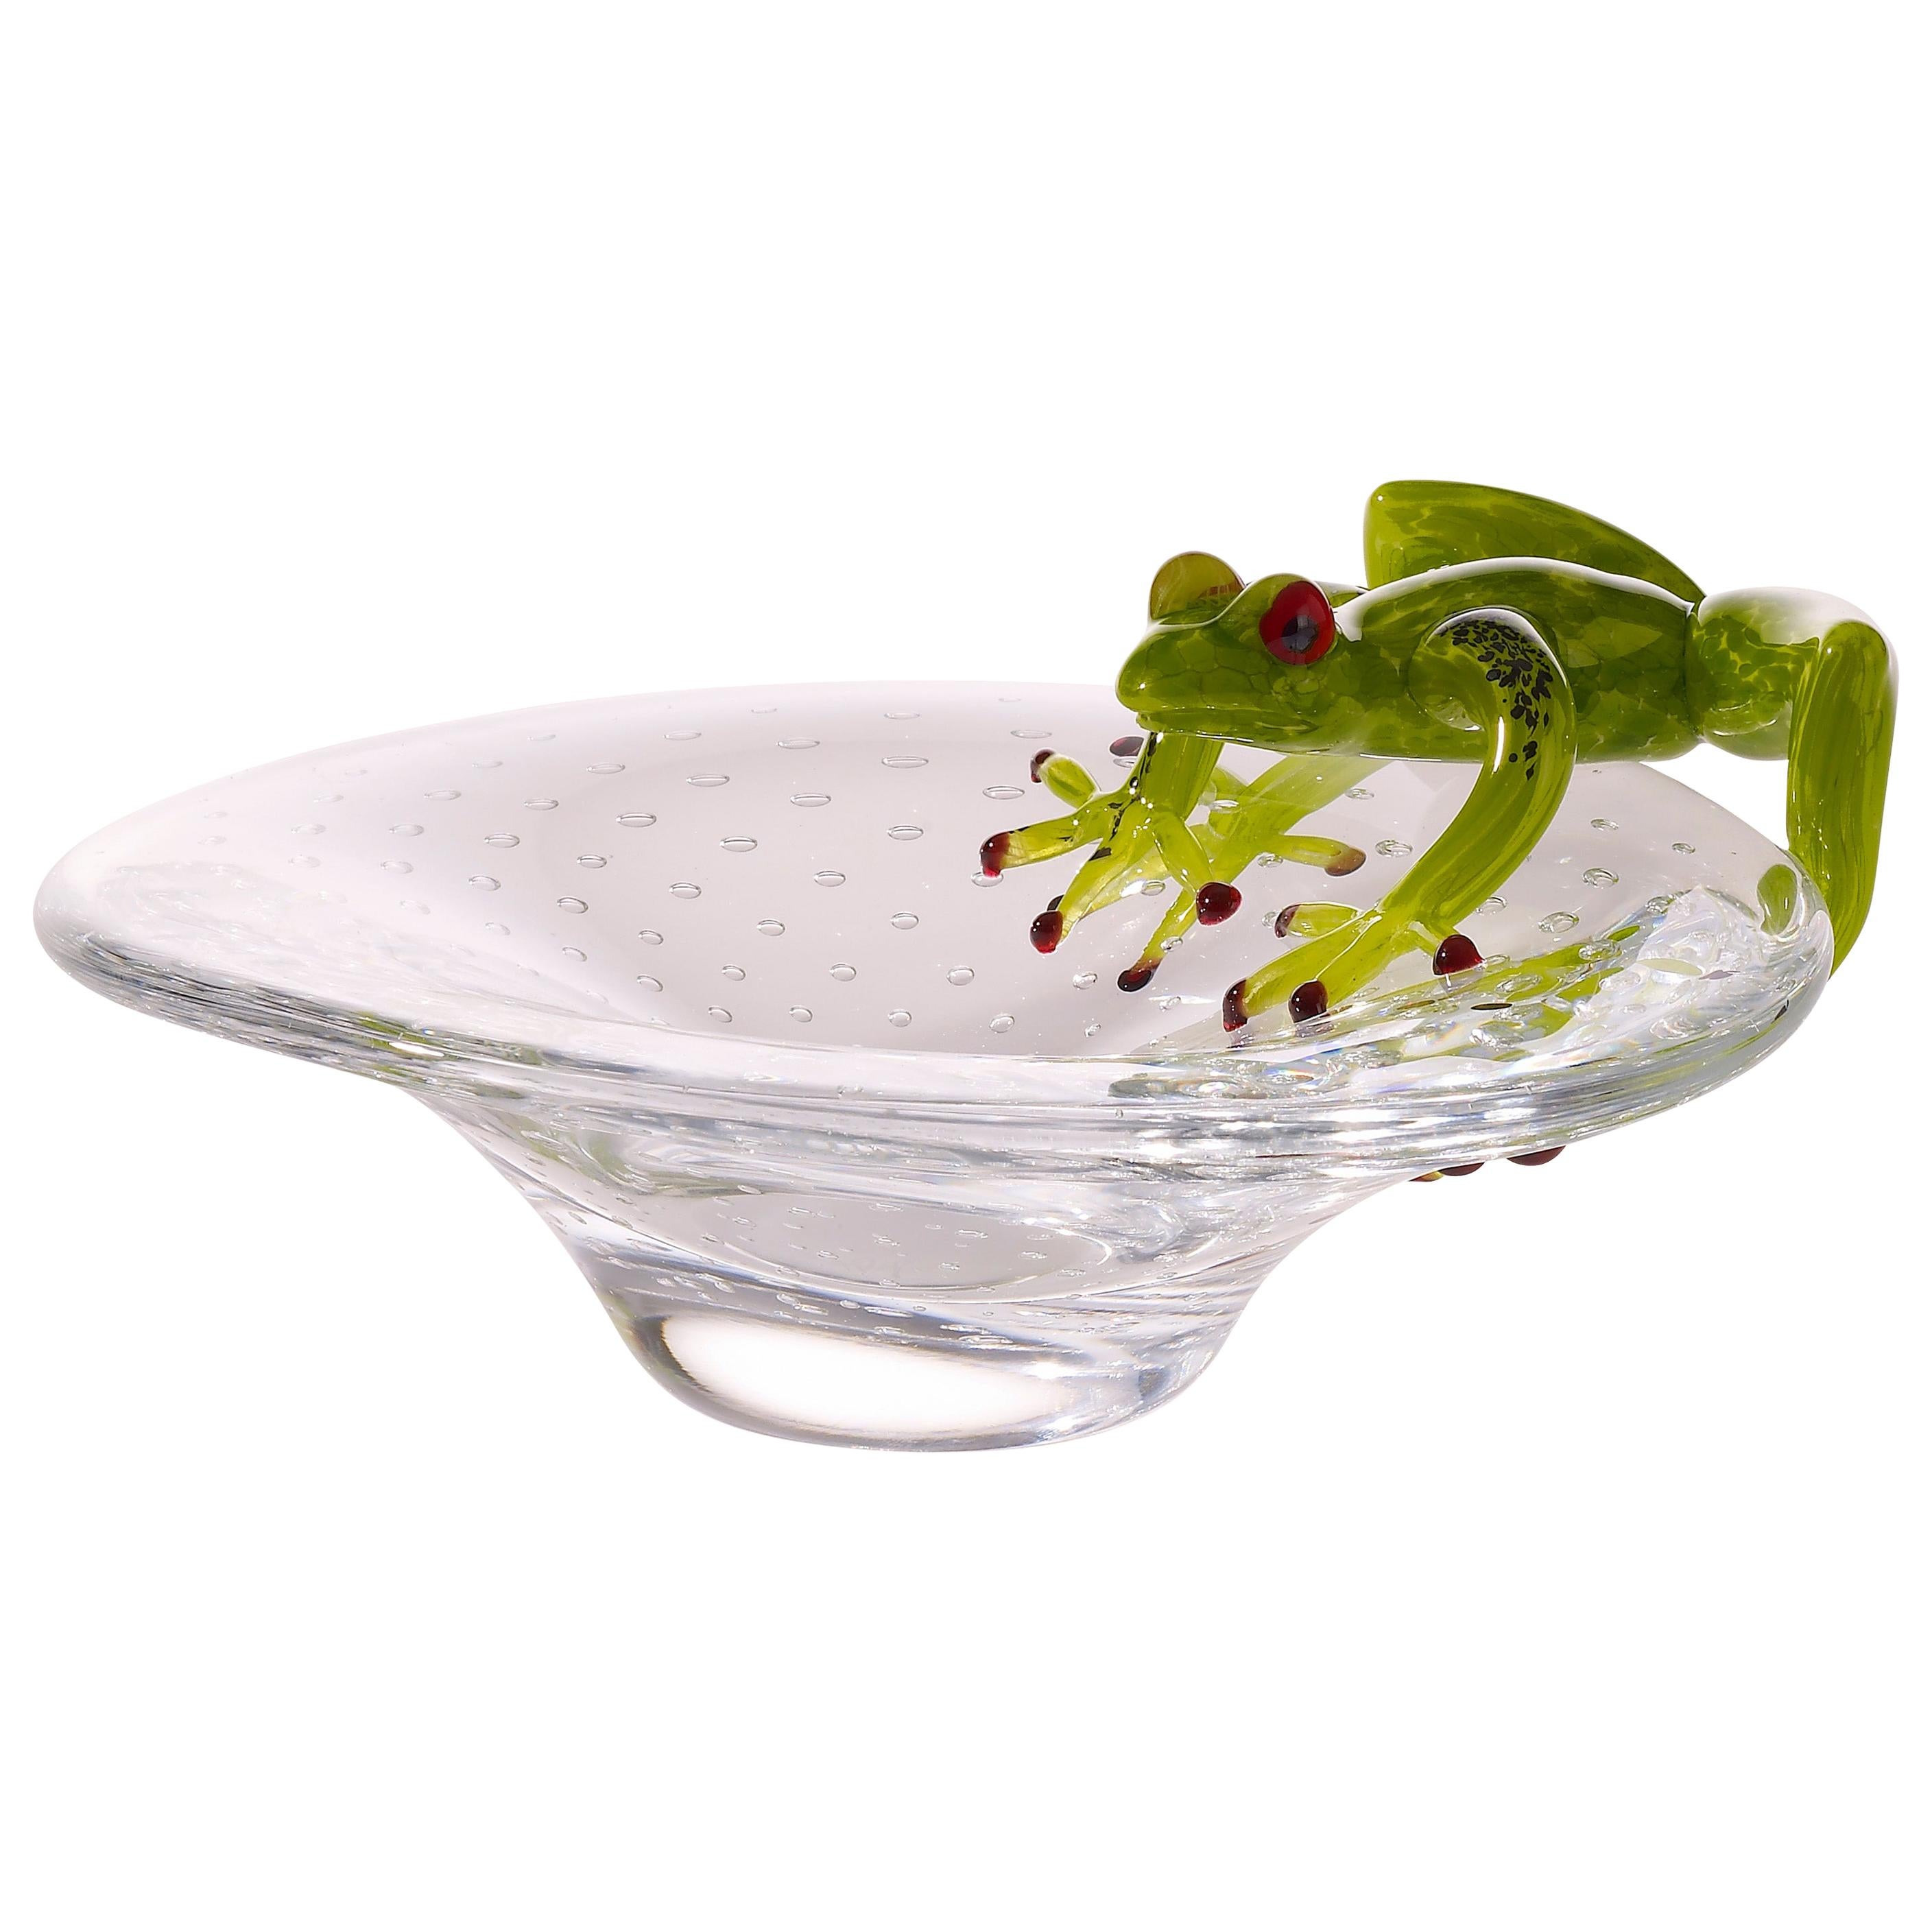 Tray with Frog, in Glass, Italy